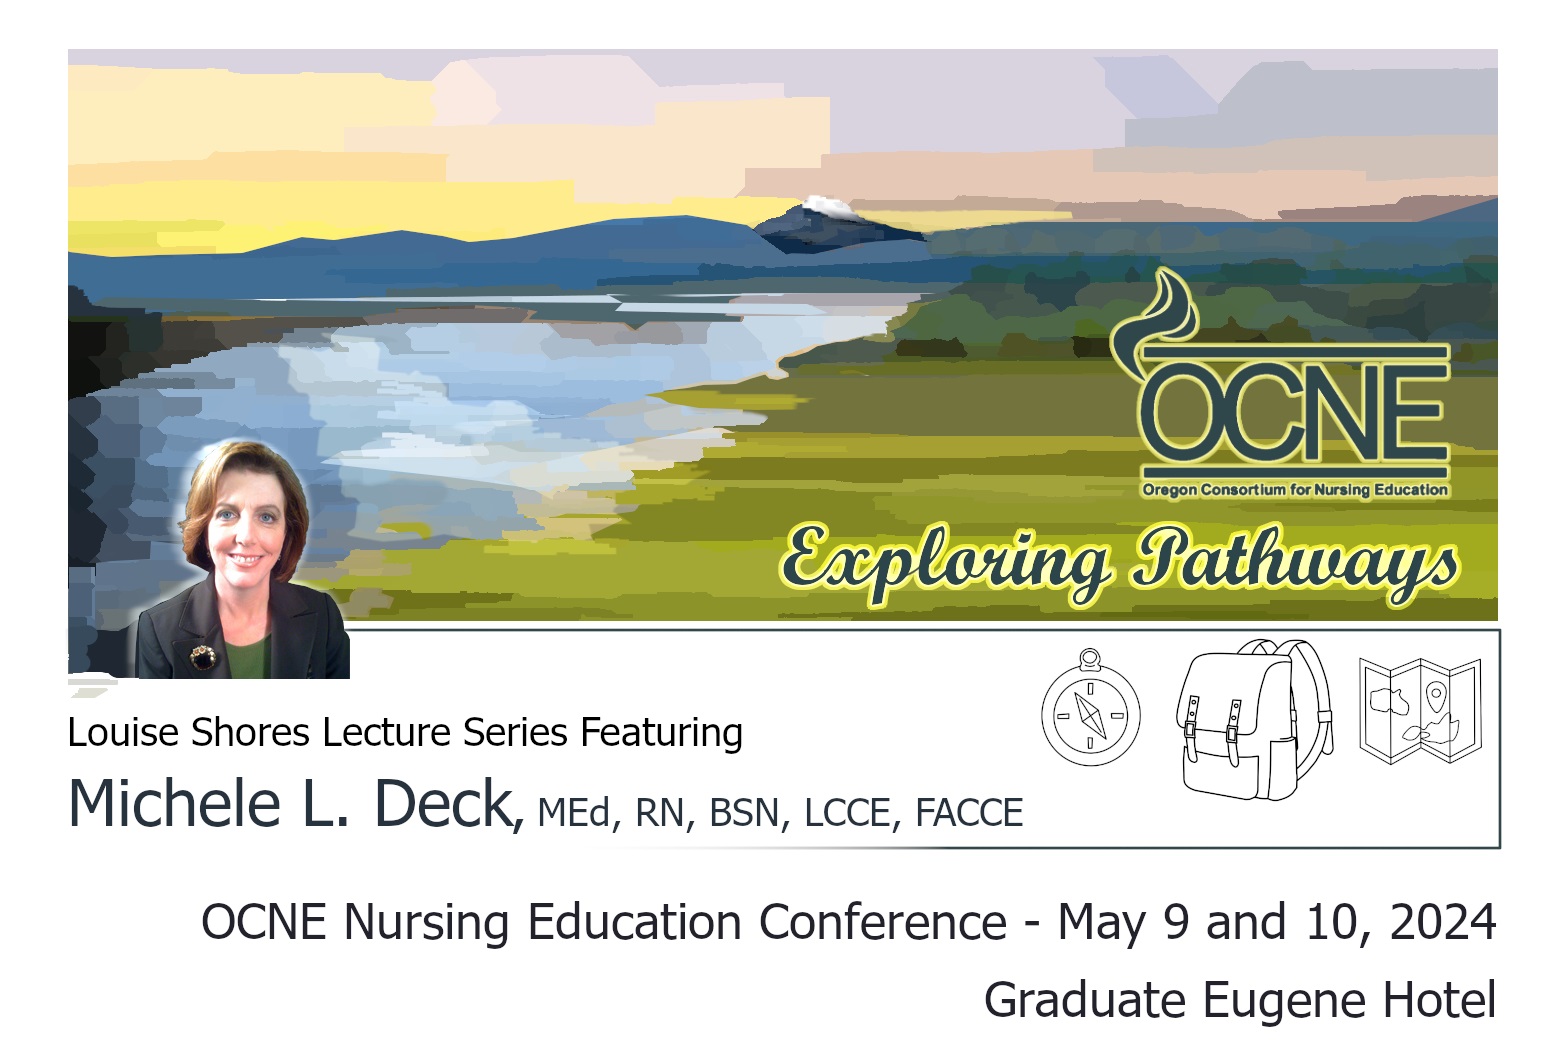 Flyer for OCNE Conference, Exploring Pathways, May 9 and 10, 2024